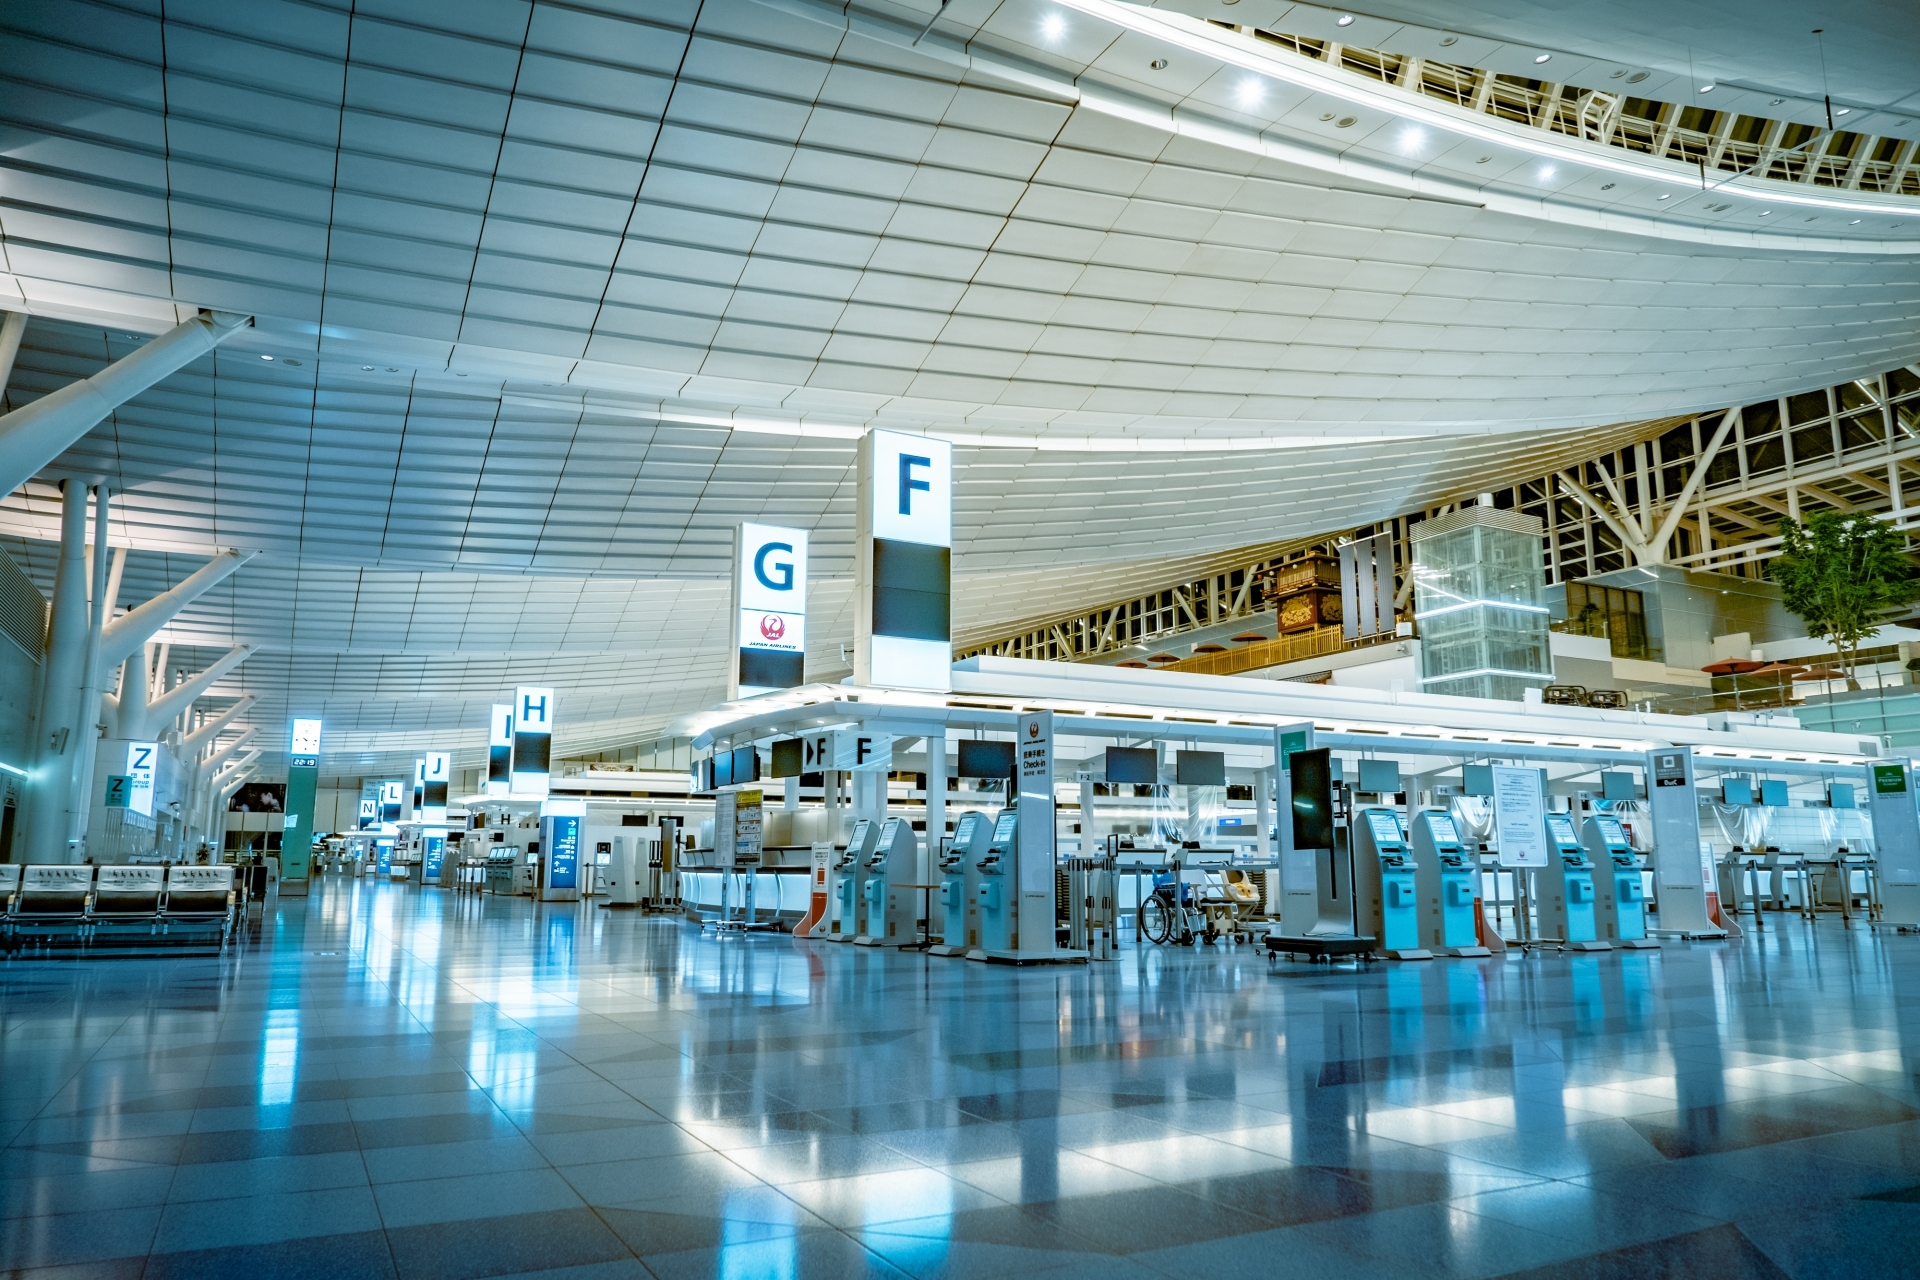 Haneda Airport Tops Skytrax’s Annual List of the World’s Cleanest Airports for Ninth Consecutive Year